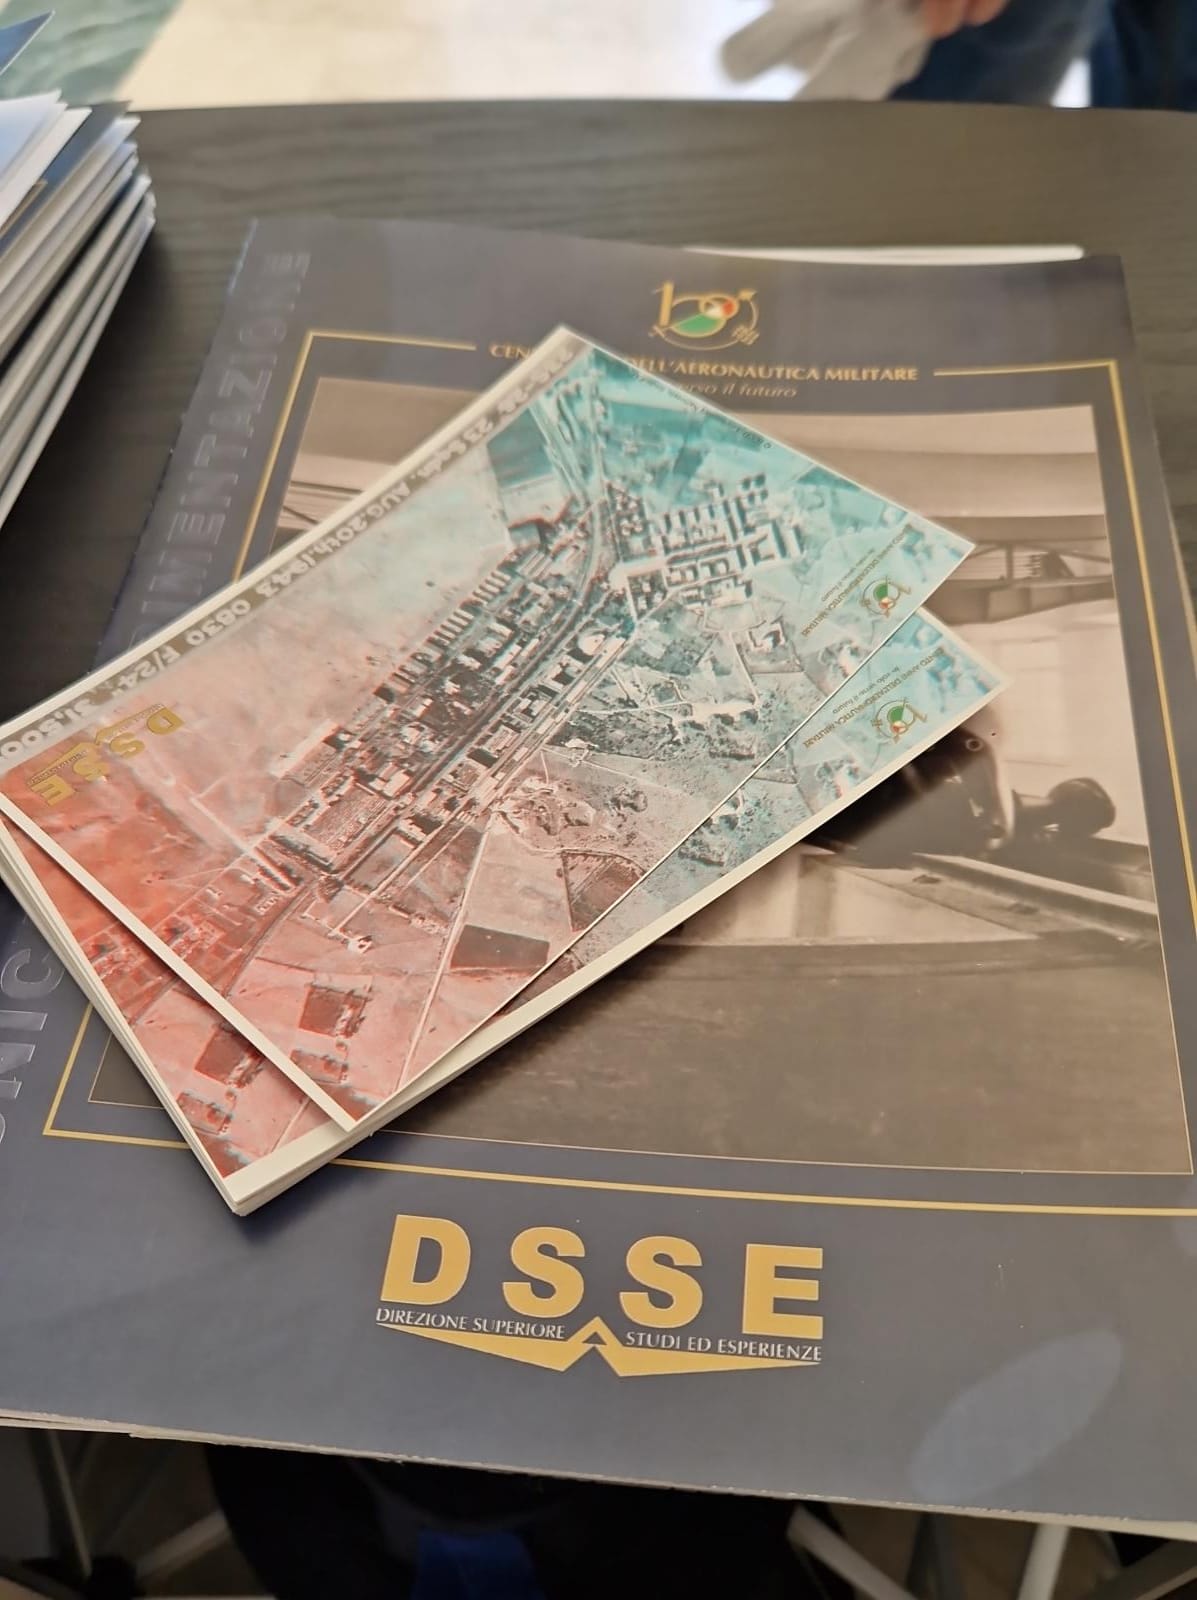 DSSE_Museo